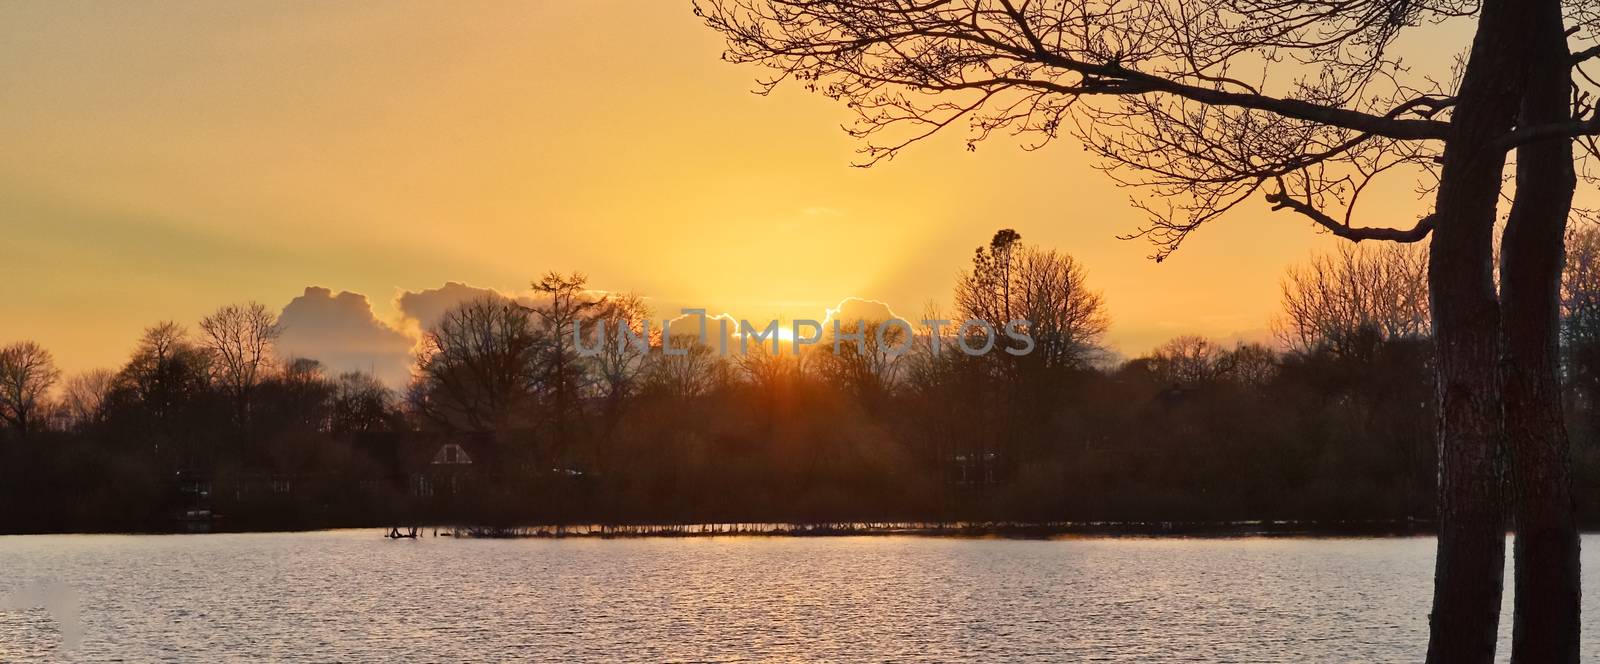 Beautiful and romantic sunset at a lake in stunning yellow and orange colors